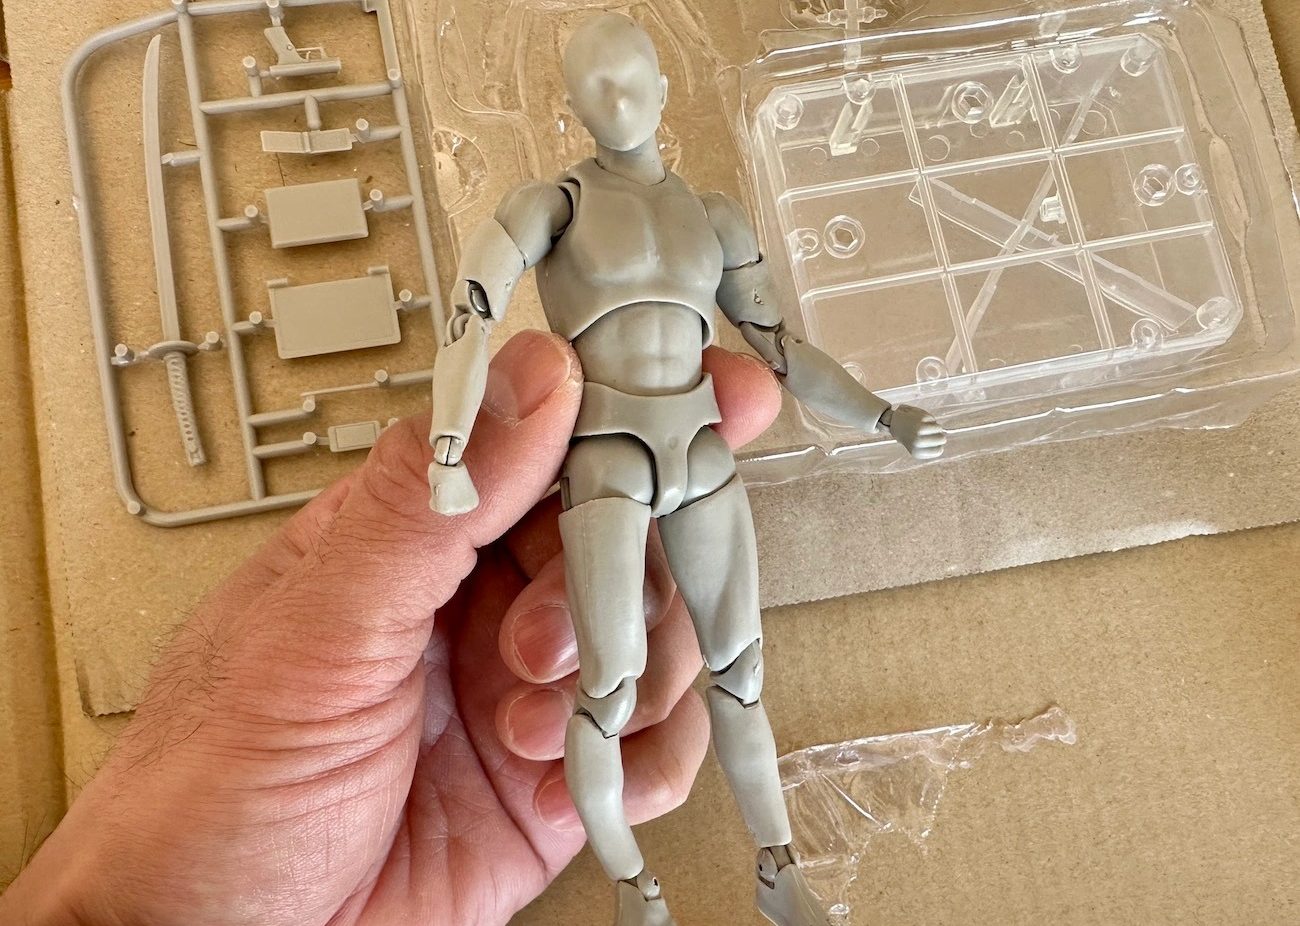 Amazon.com : Art Sketch Mannequin Model Crafts 8inch Wood Movable Figure  for Artists Photography Animation Desk Toy : Arts, Crafts & Sewing